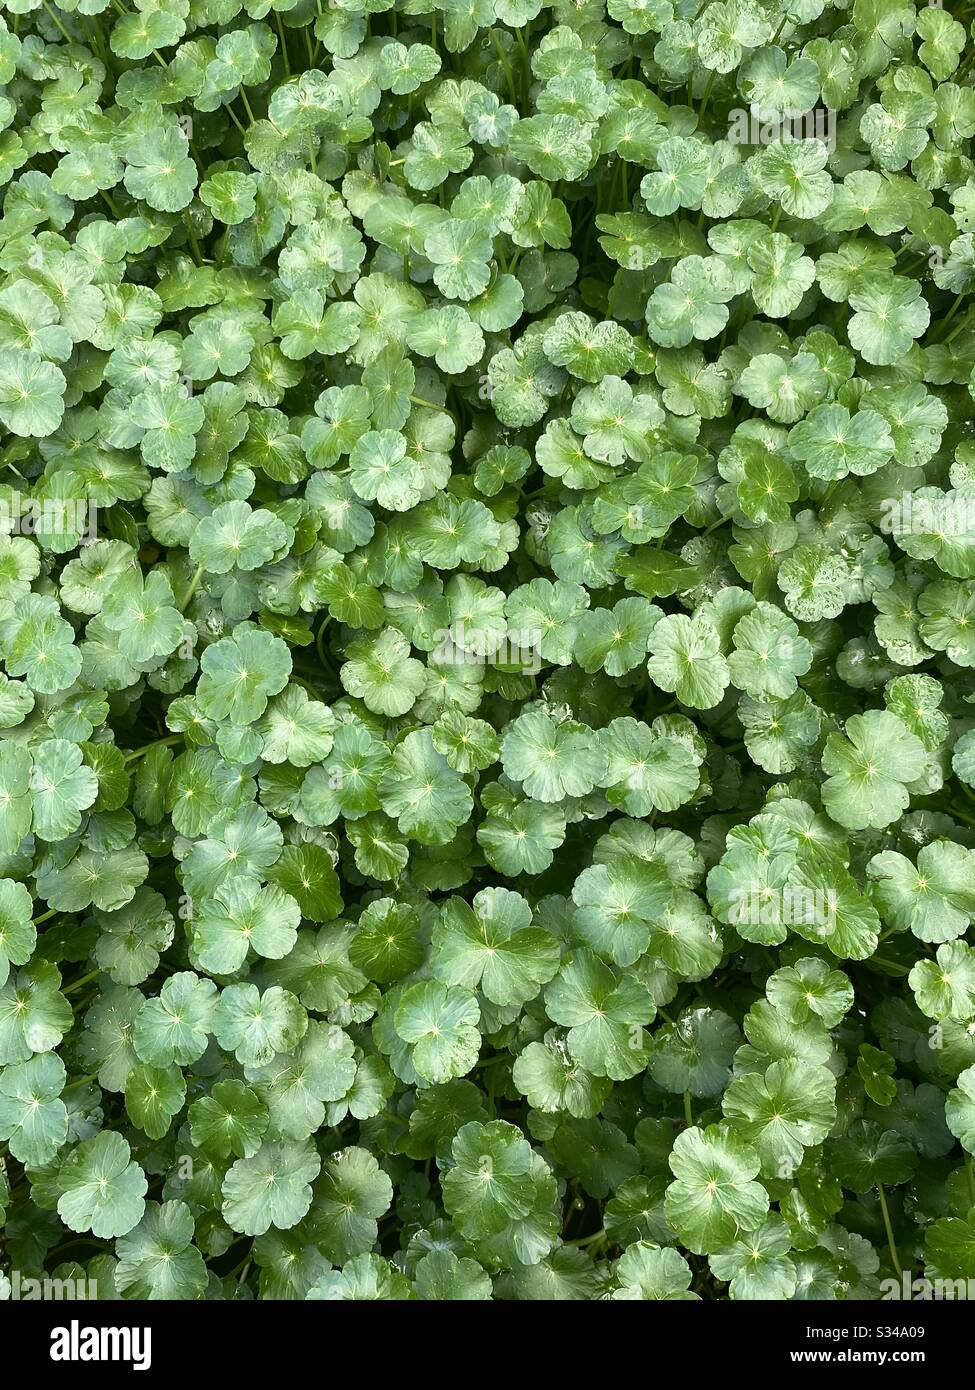 Solid green background of dichondra plant Stock Photo